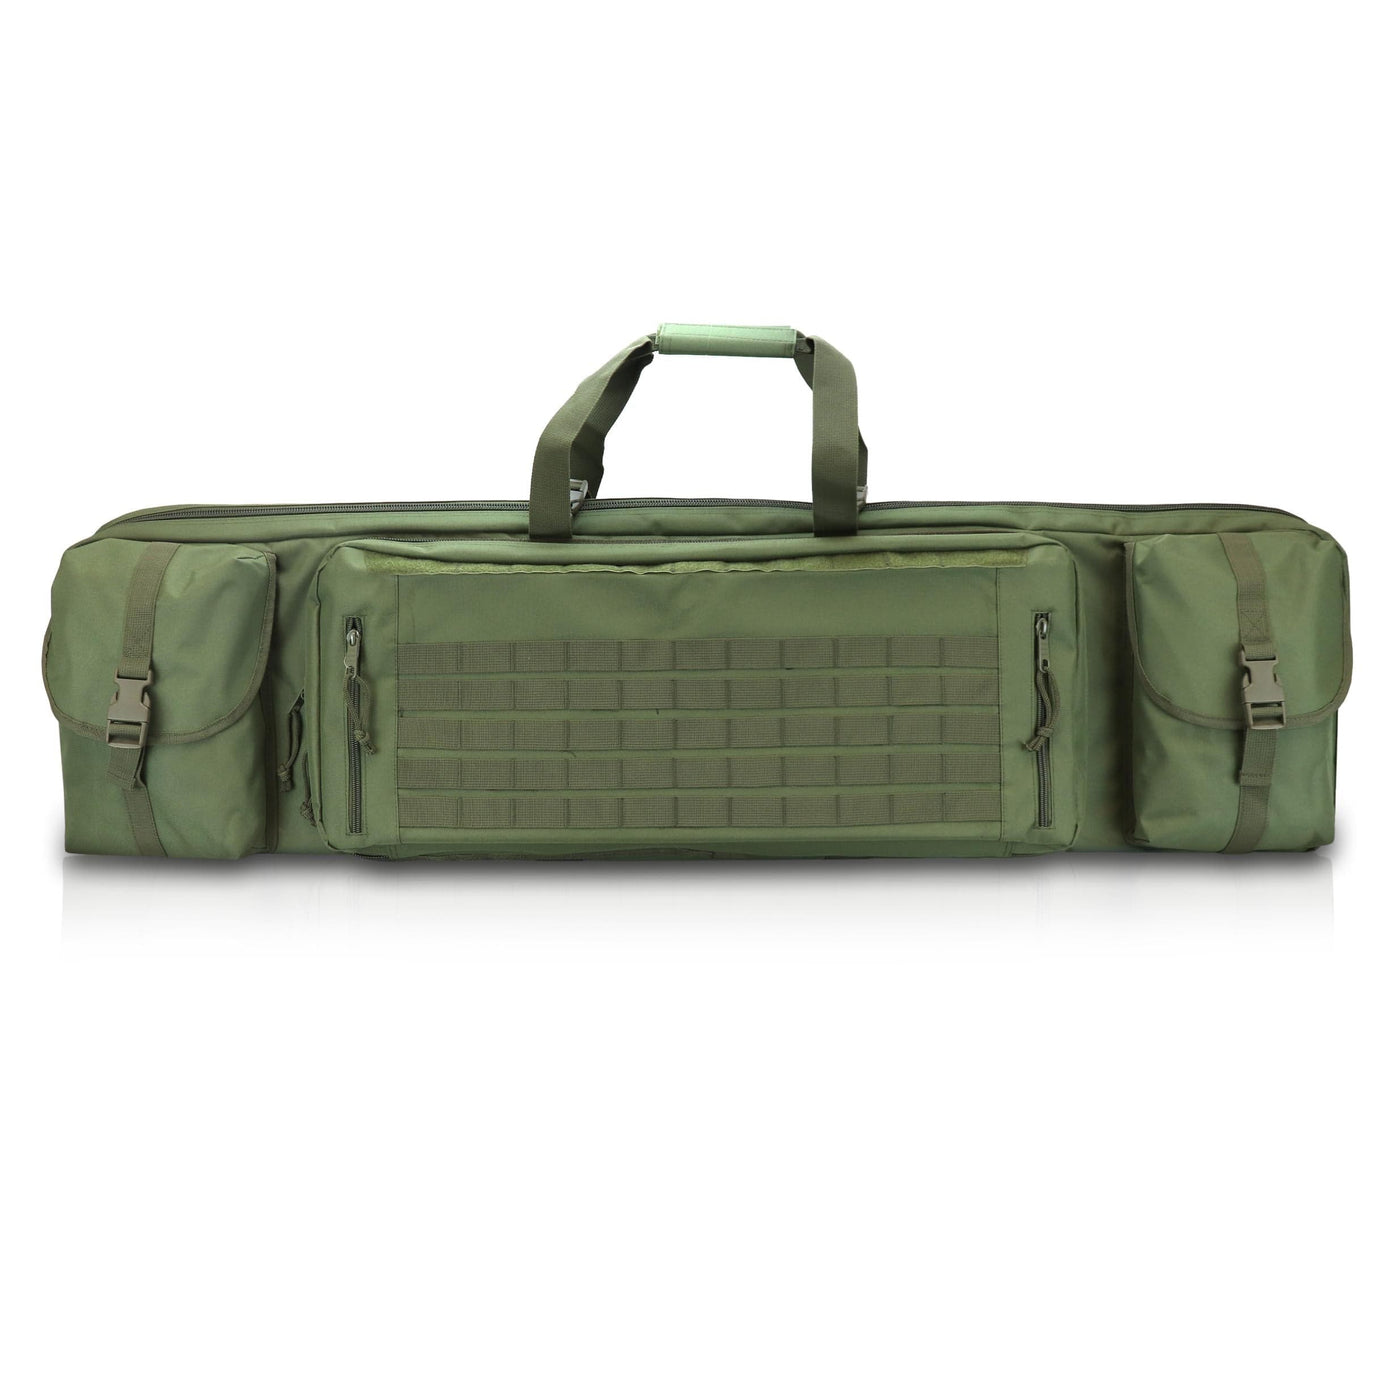 Osage River Osage River 46 in Double Rifle Case OD Green Shooting